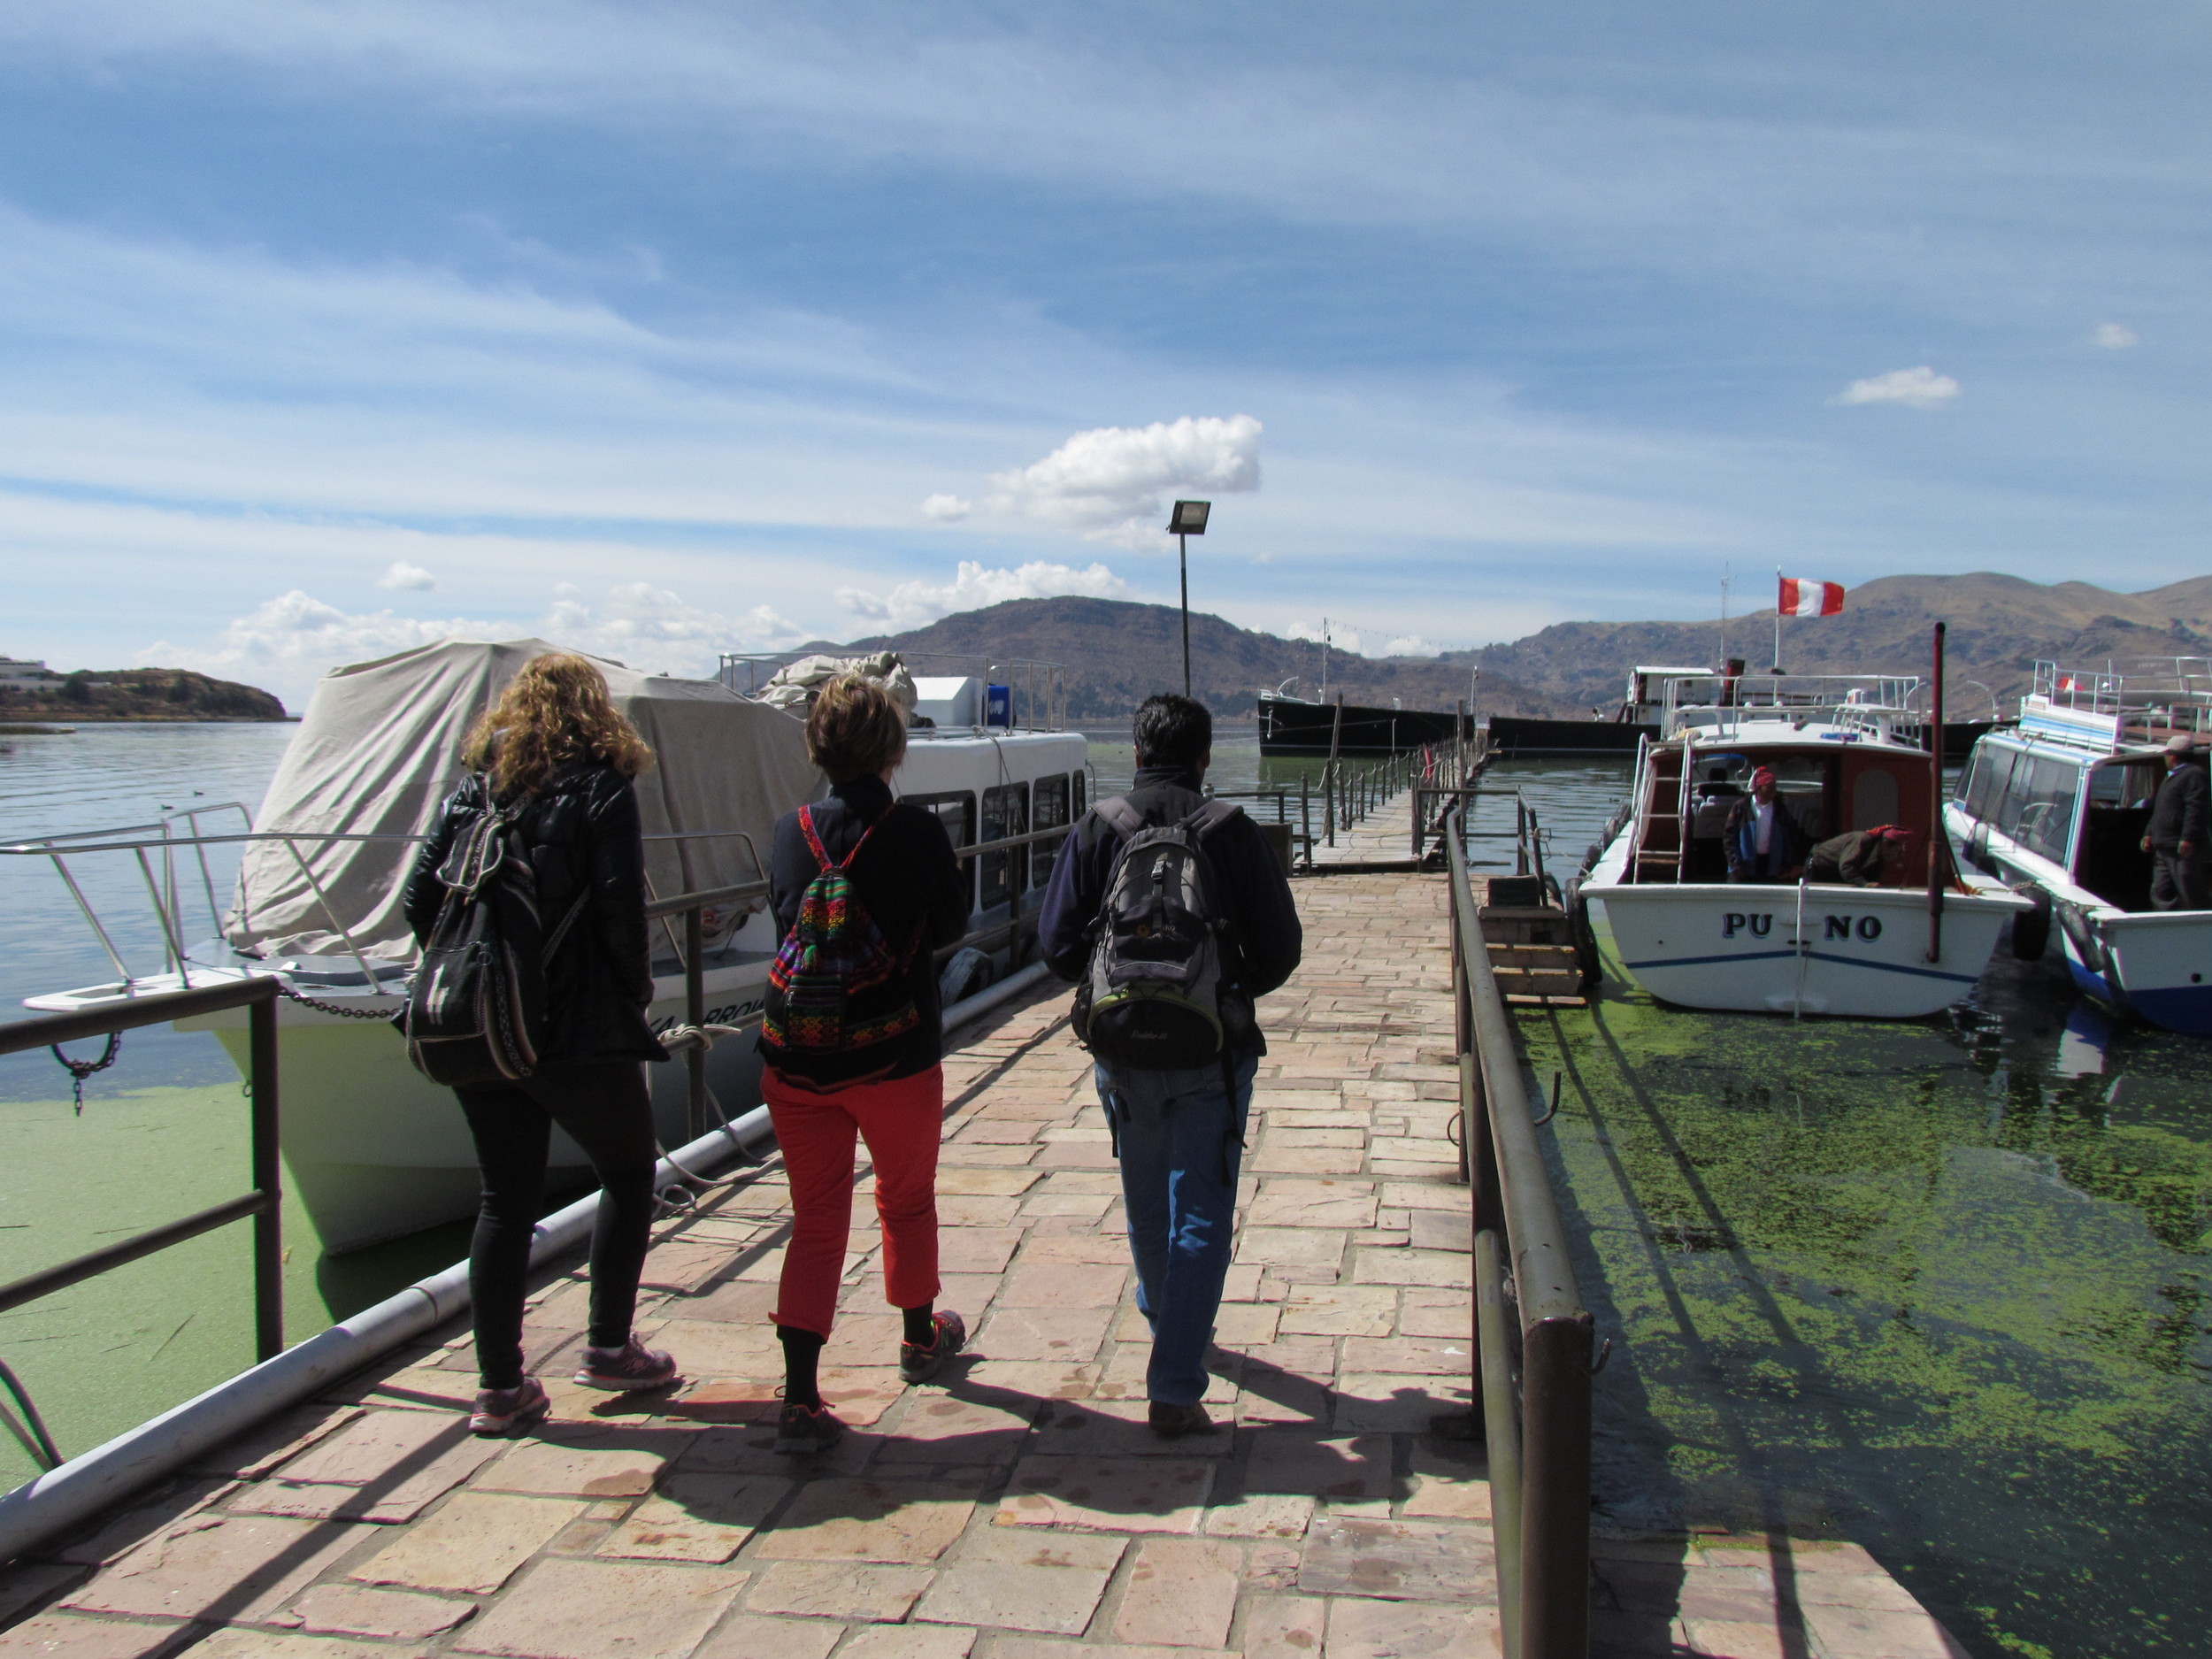 Heading on a day of adventure on lake Titicaca